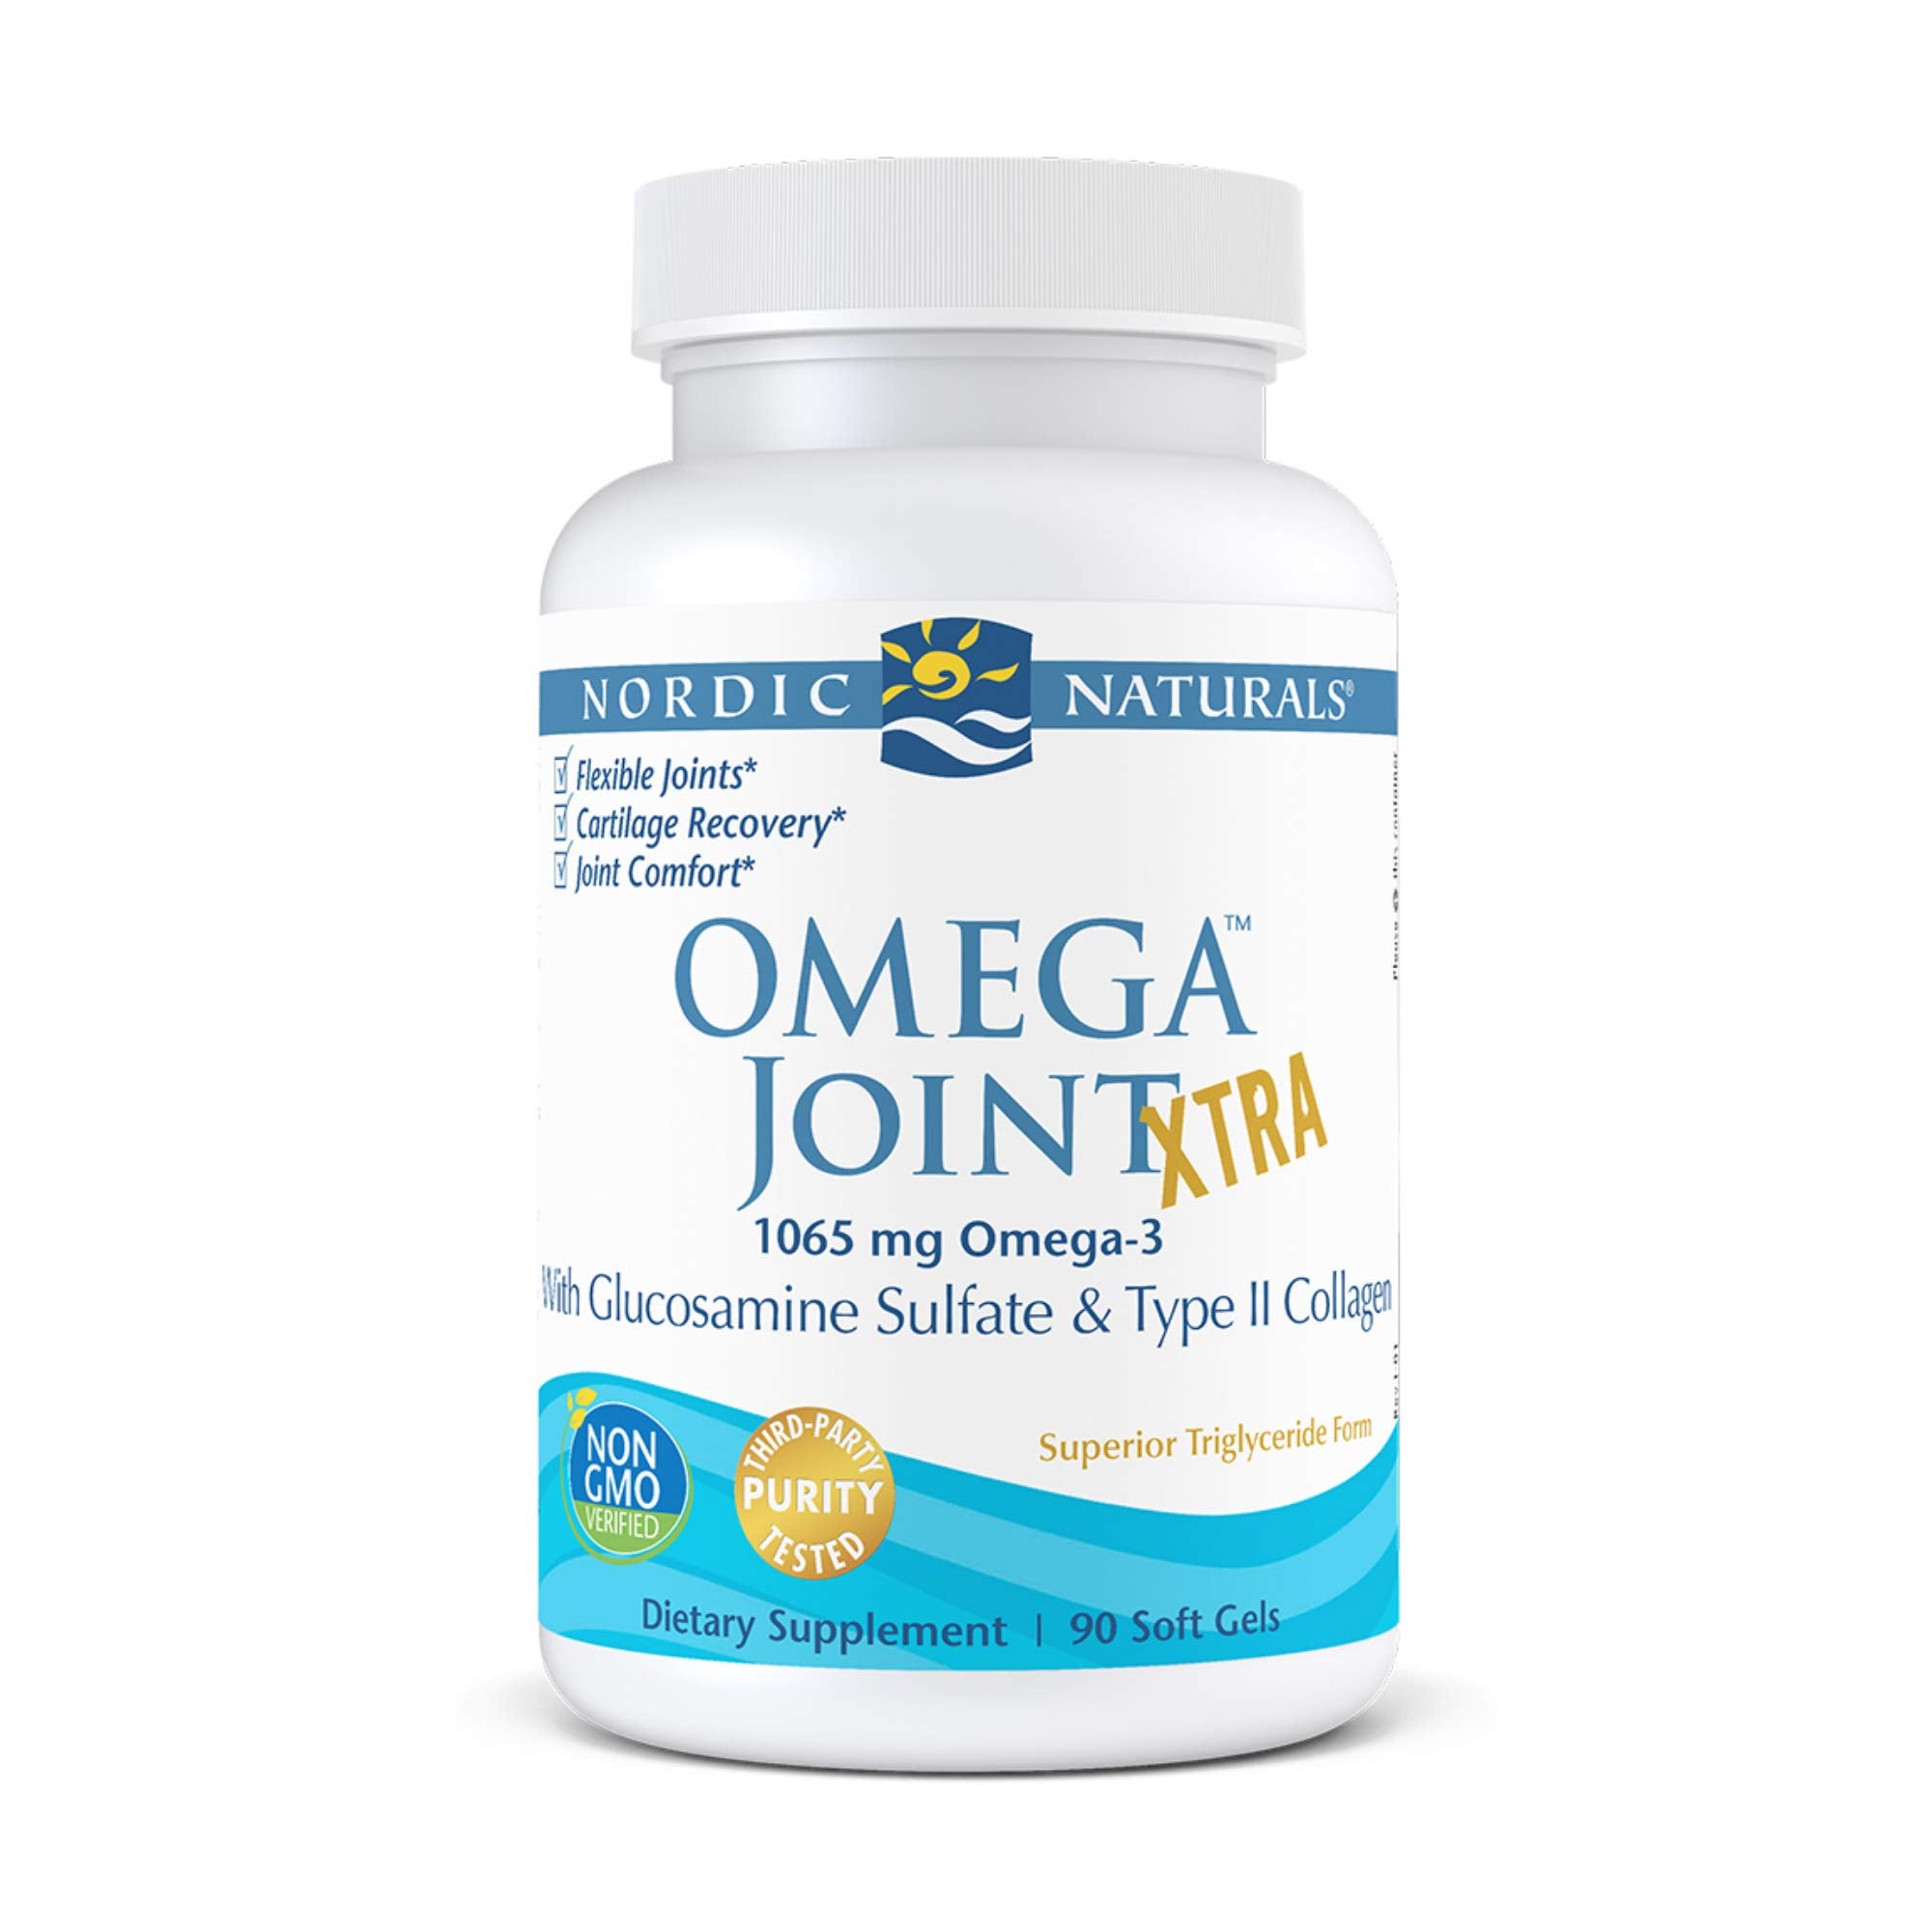 Nordic Naturals - Omega Joint Xtra, Soft Gels 90 Count, Unflavored